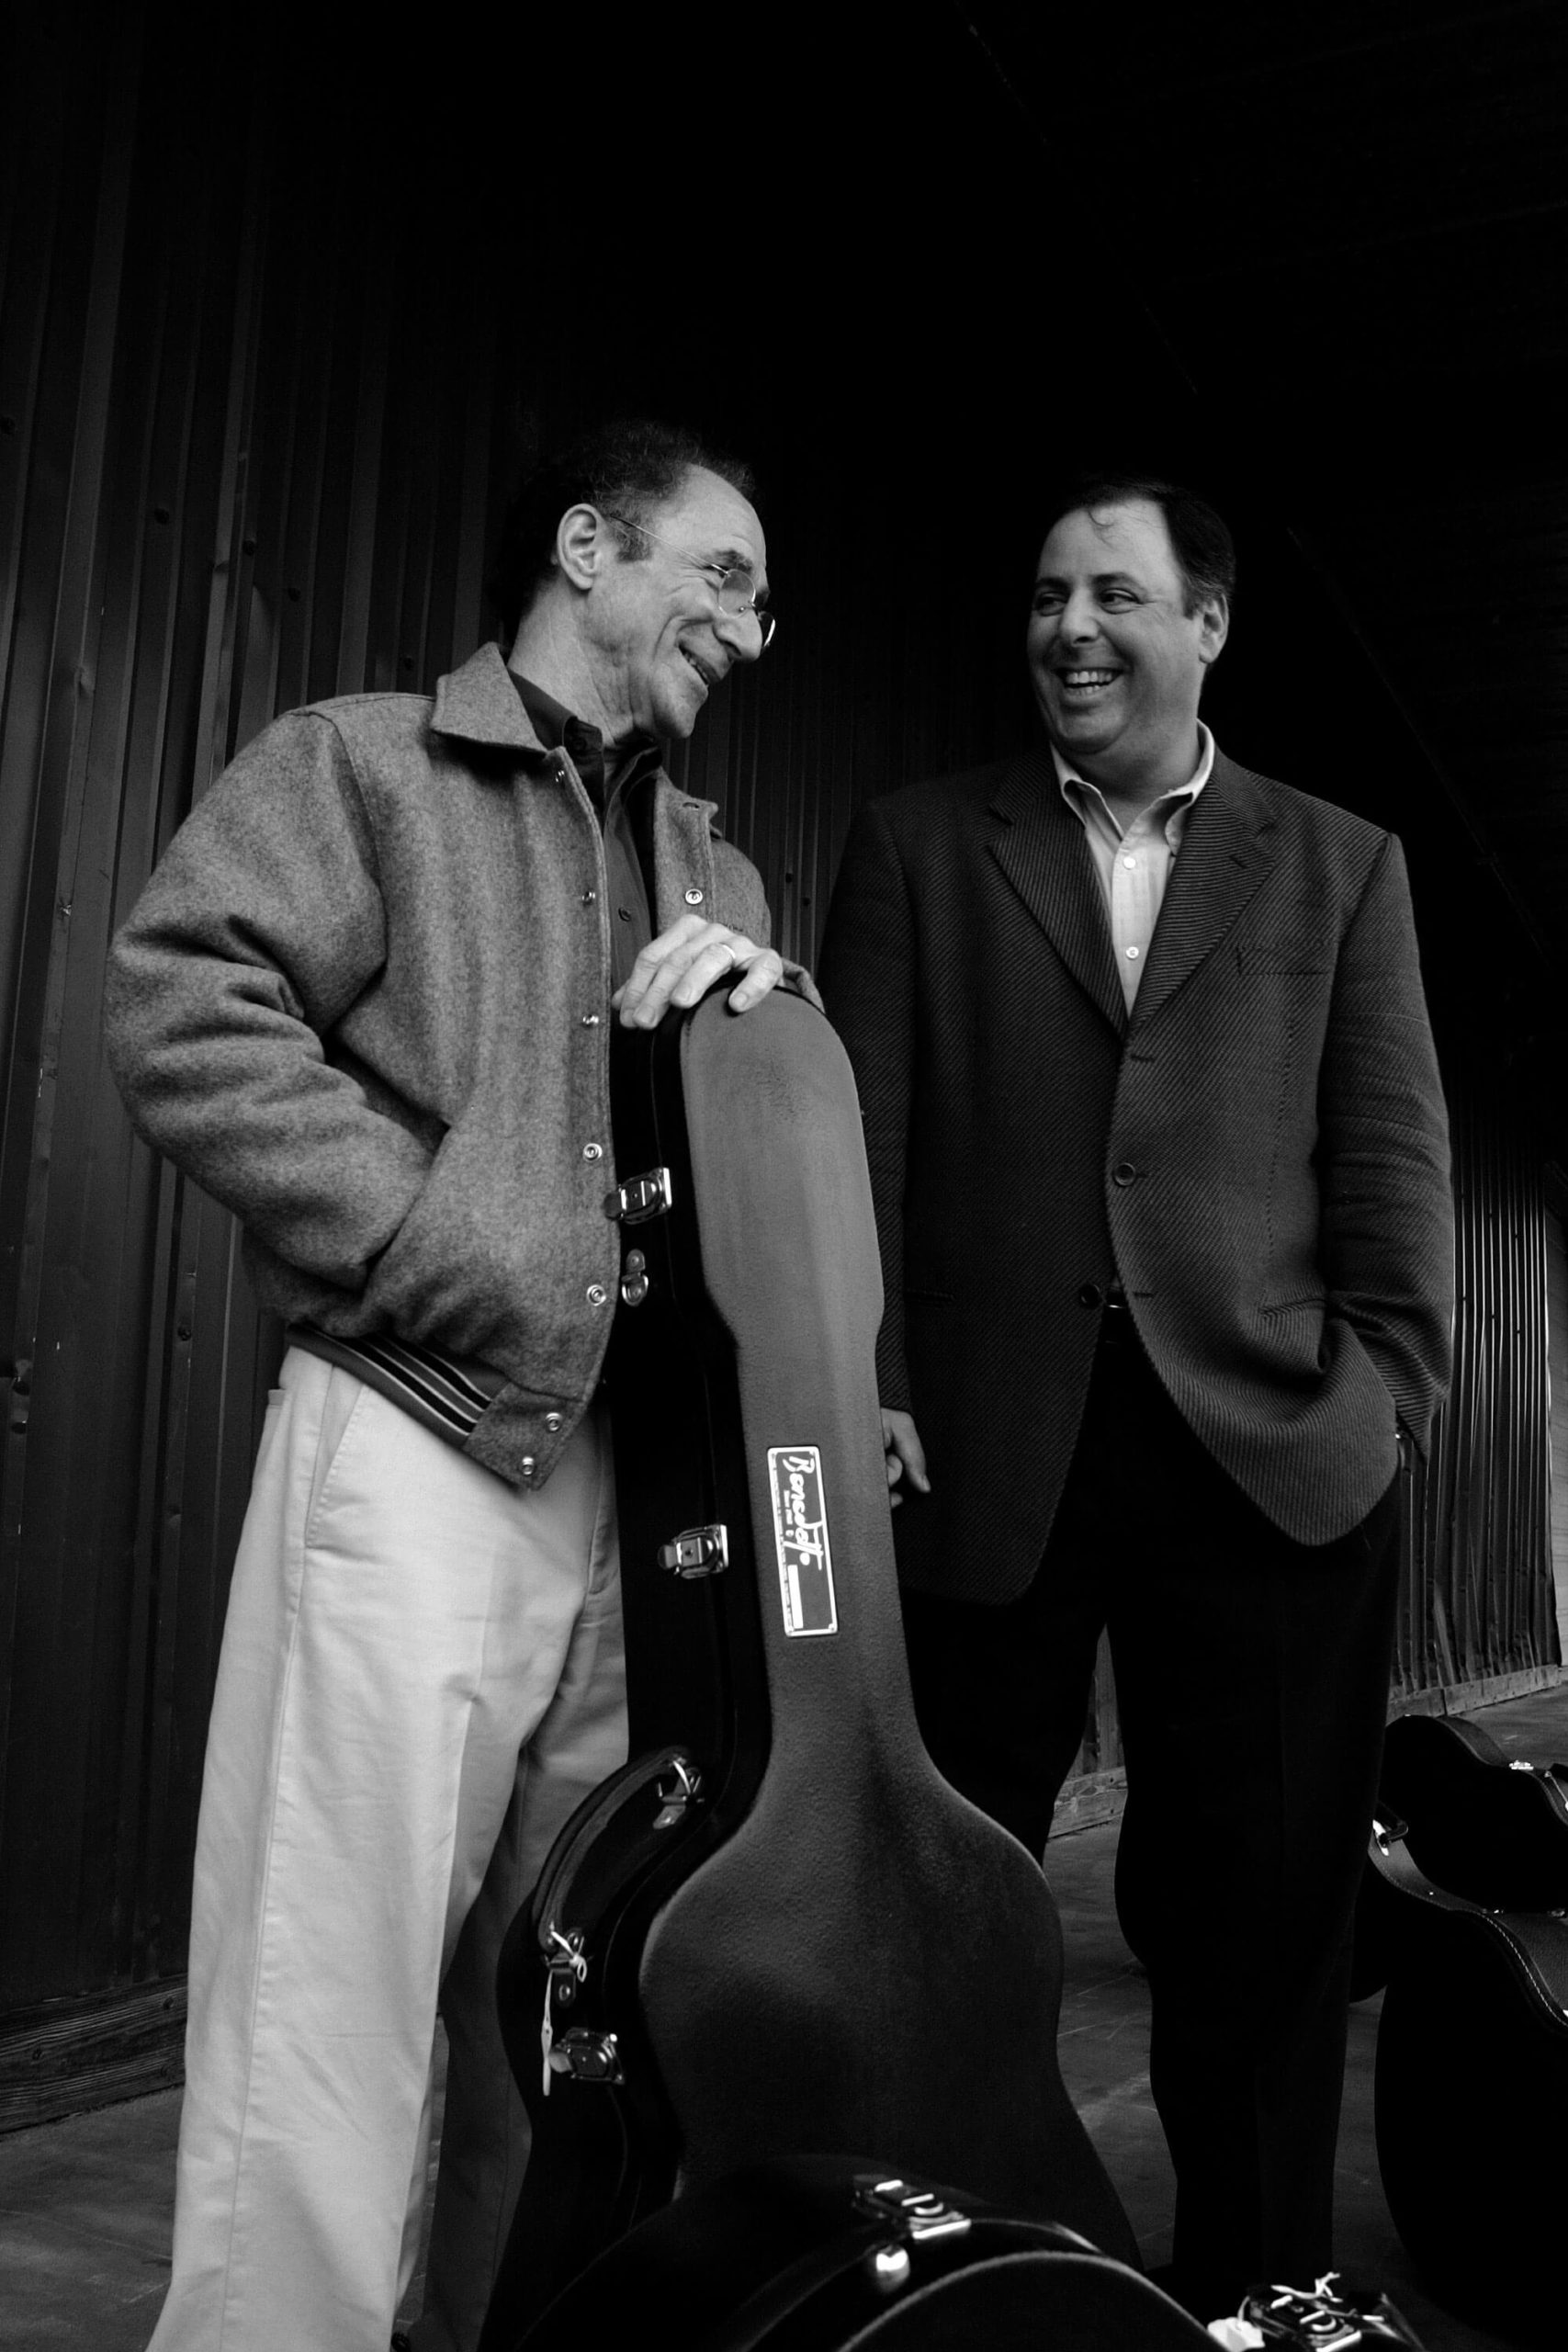 Howard Paul and Robert Benedetto enjoying a laugh in black and white